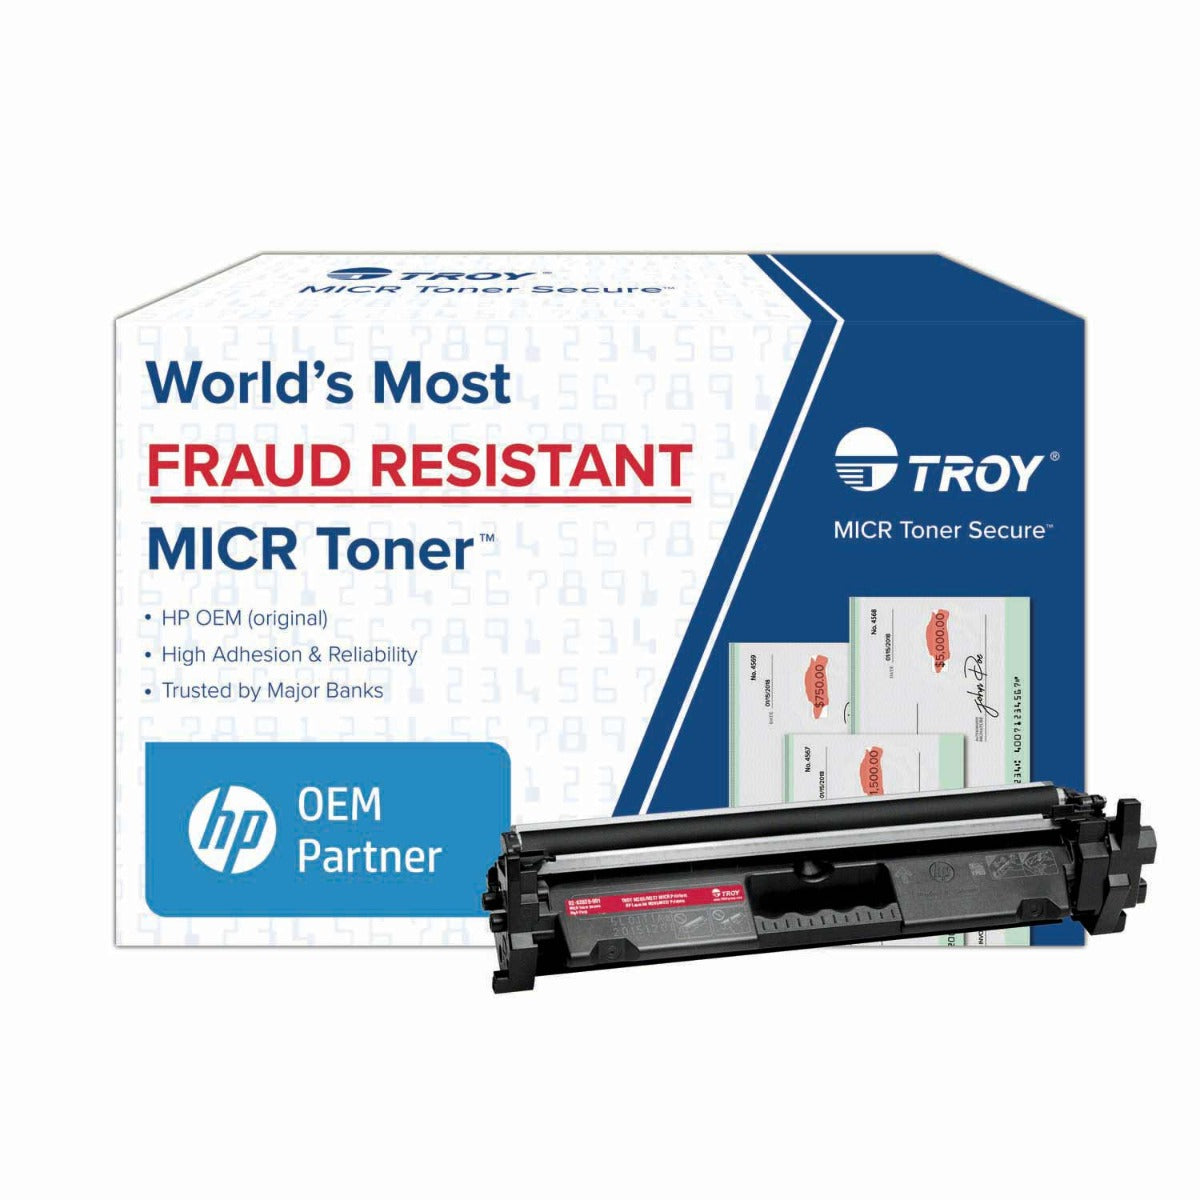 TROY M203/M227 MICR Toner Secure High Yield Cartridge (Coordinating HP Part Number: CF230X)